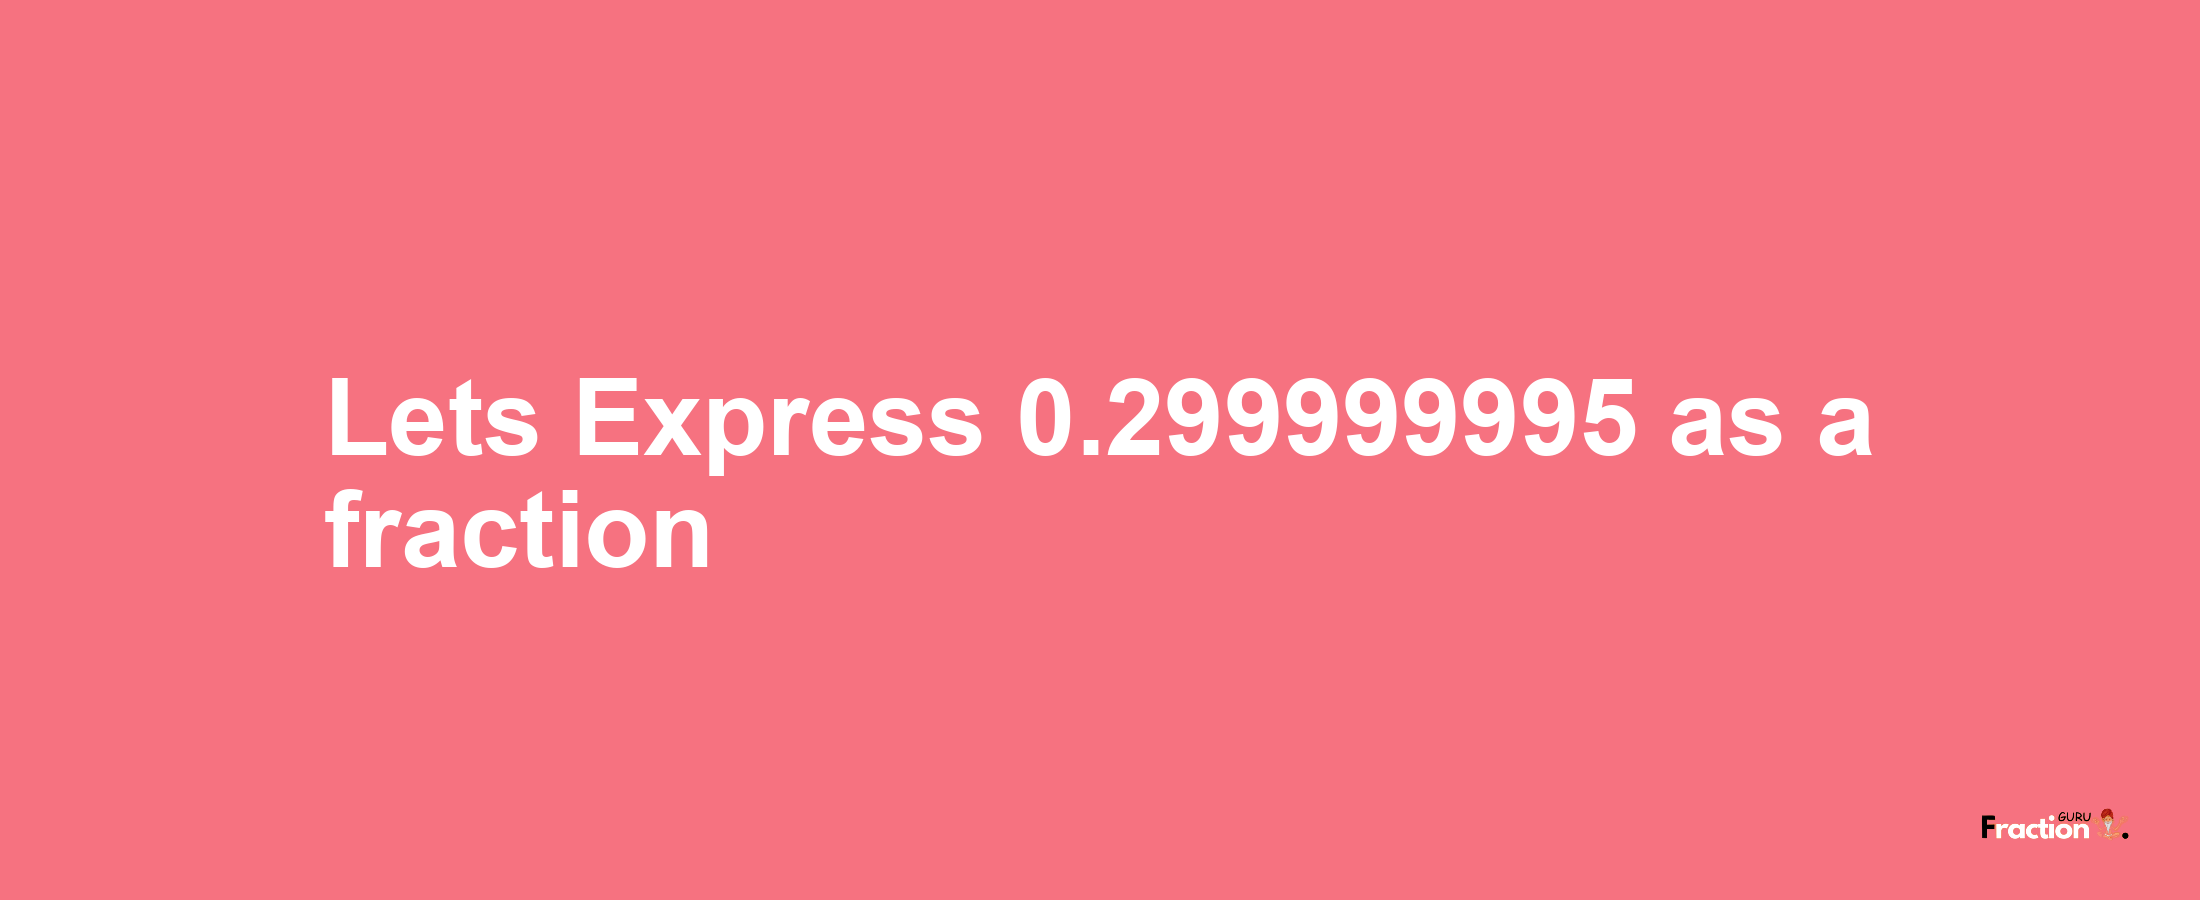 Lets Express 0.299999995 as afraction